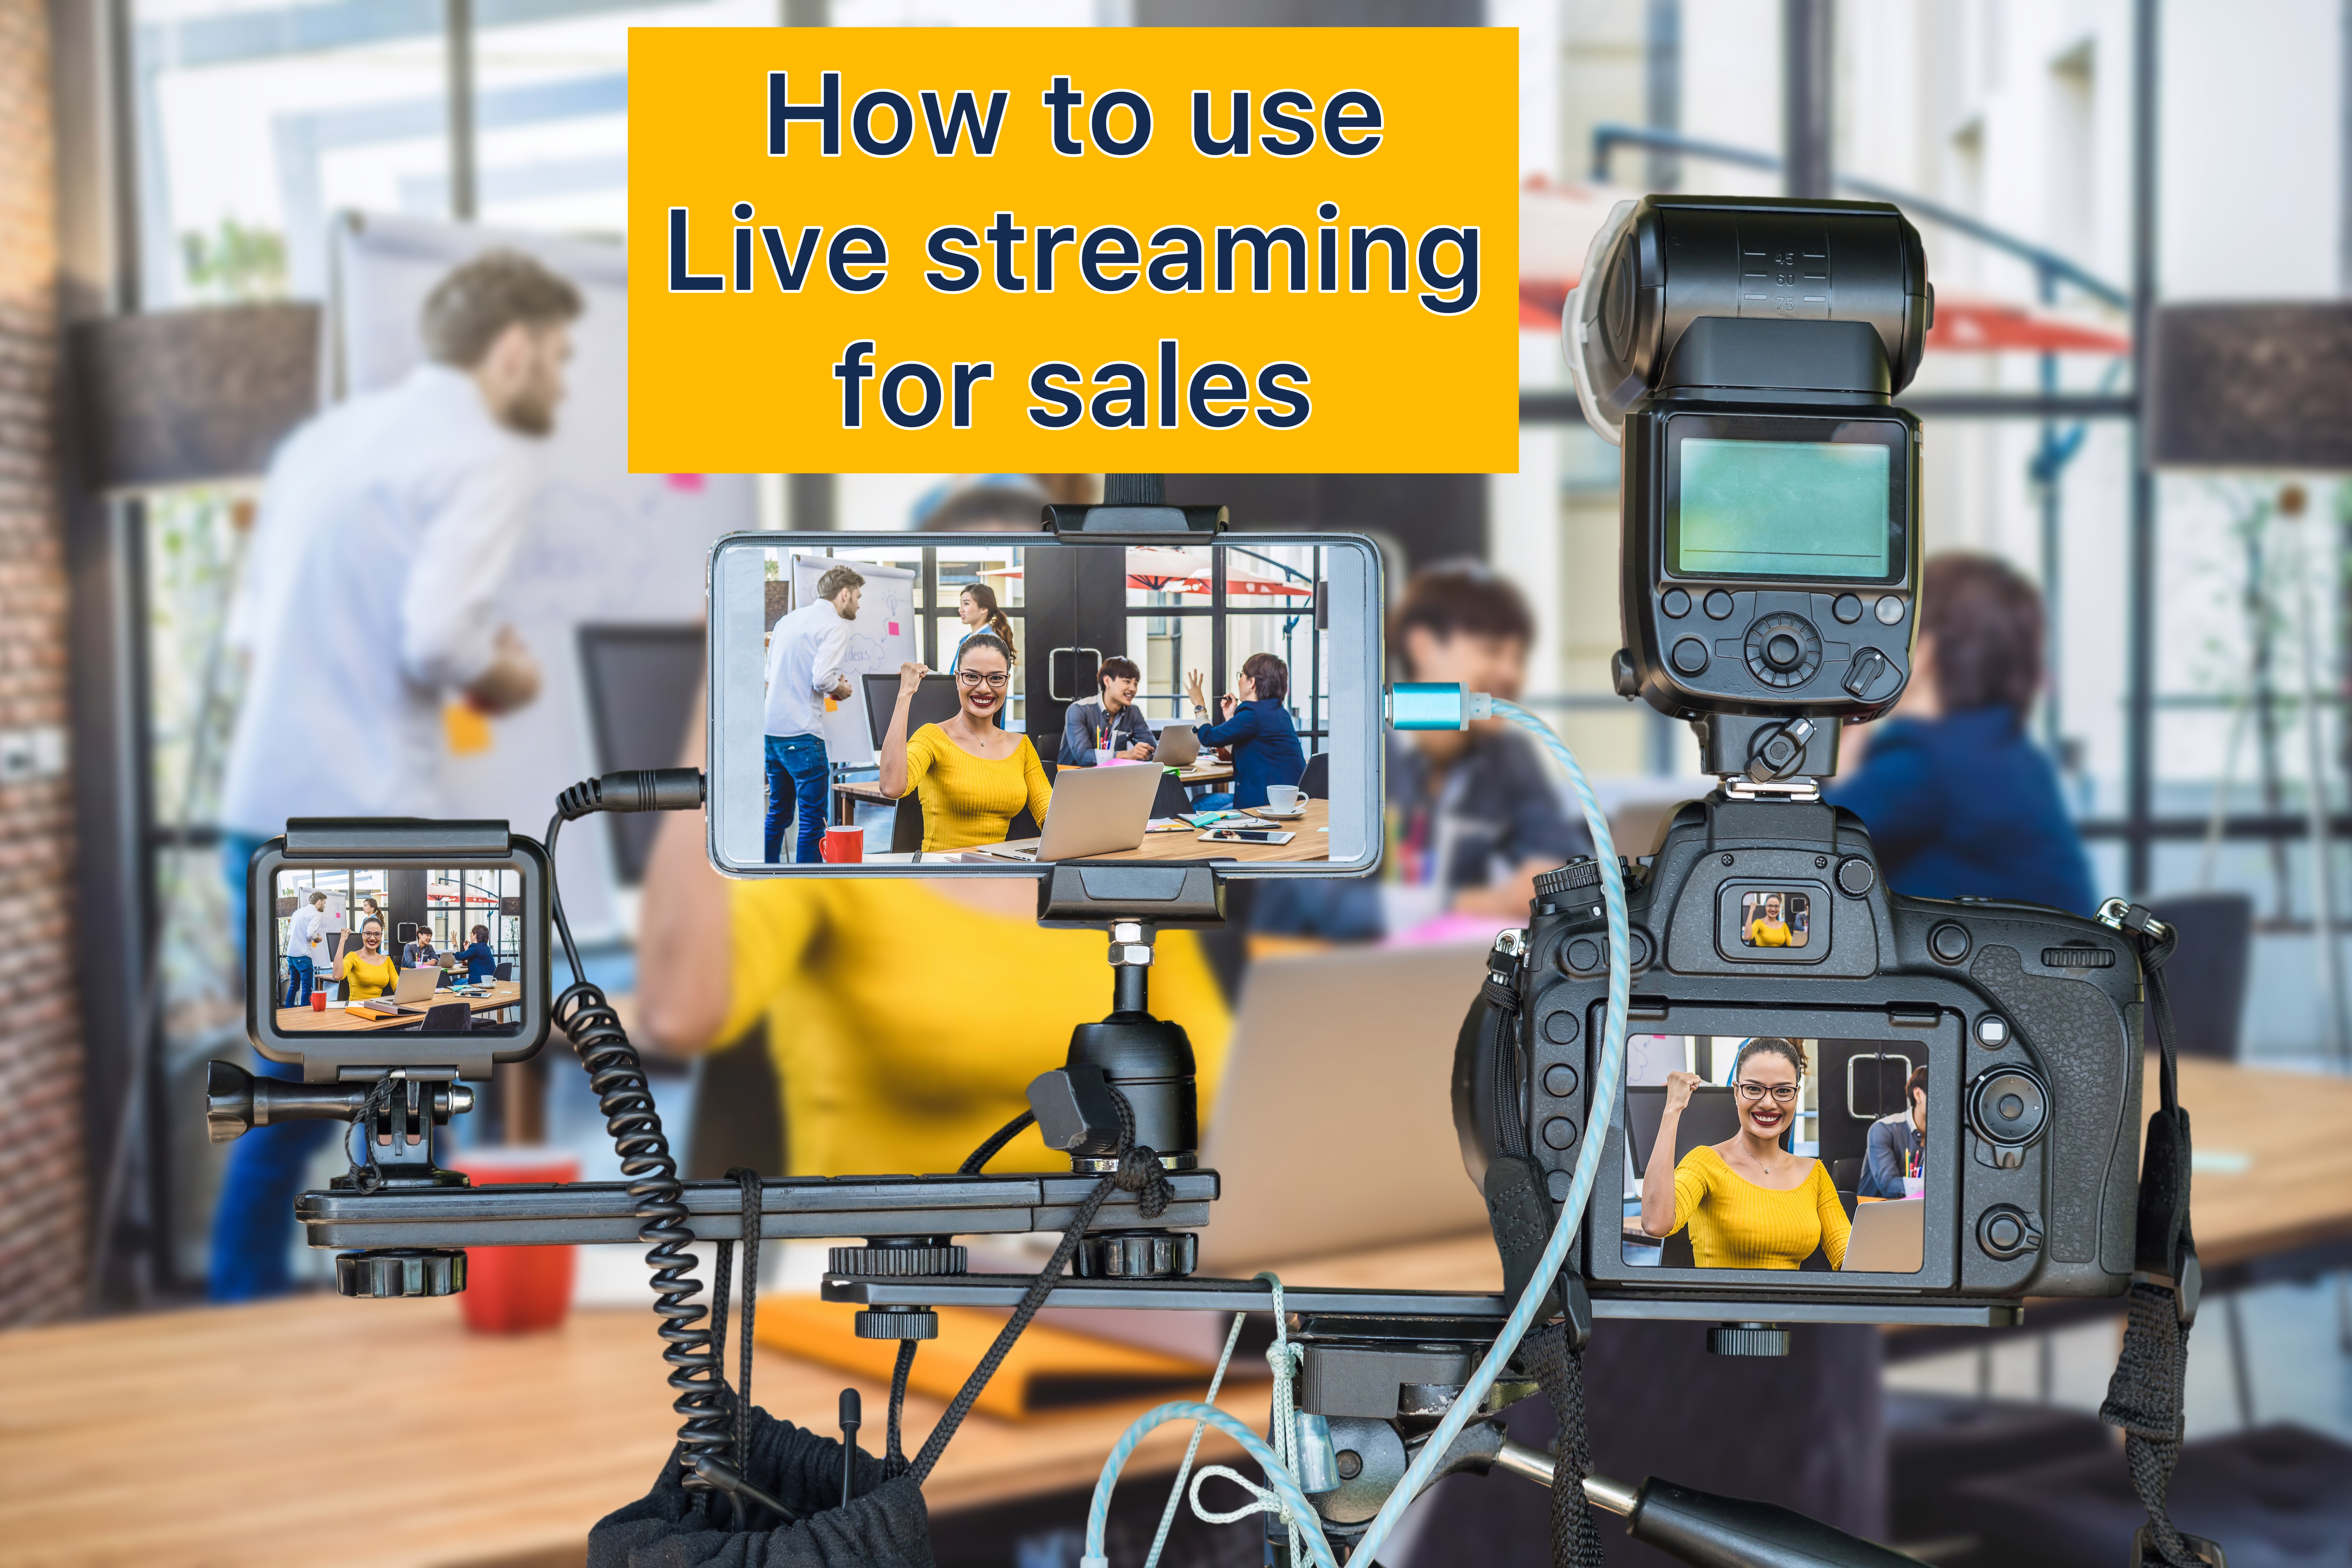 How to use live streaming for sales